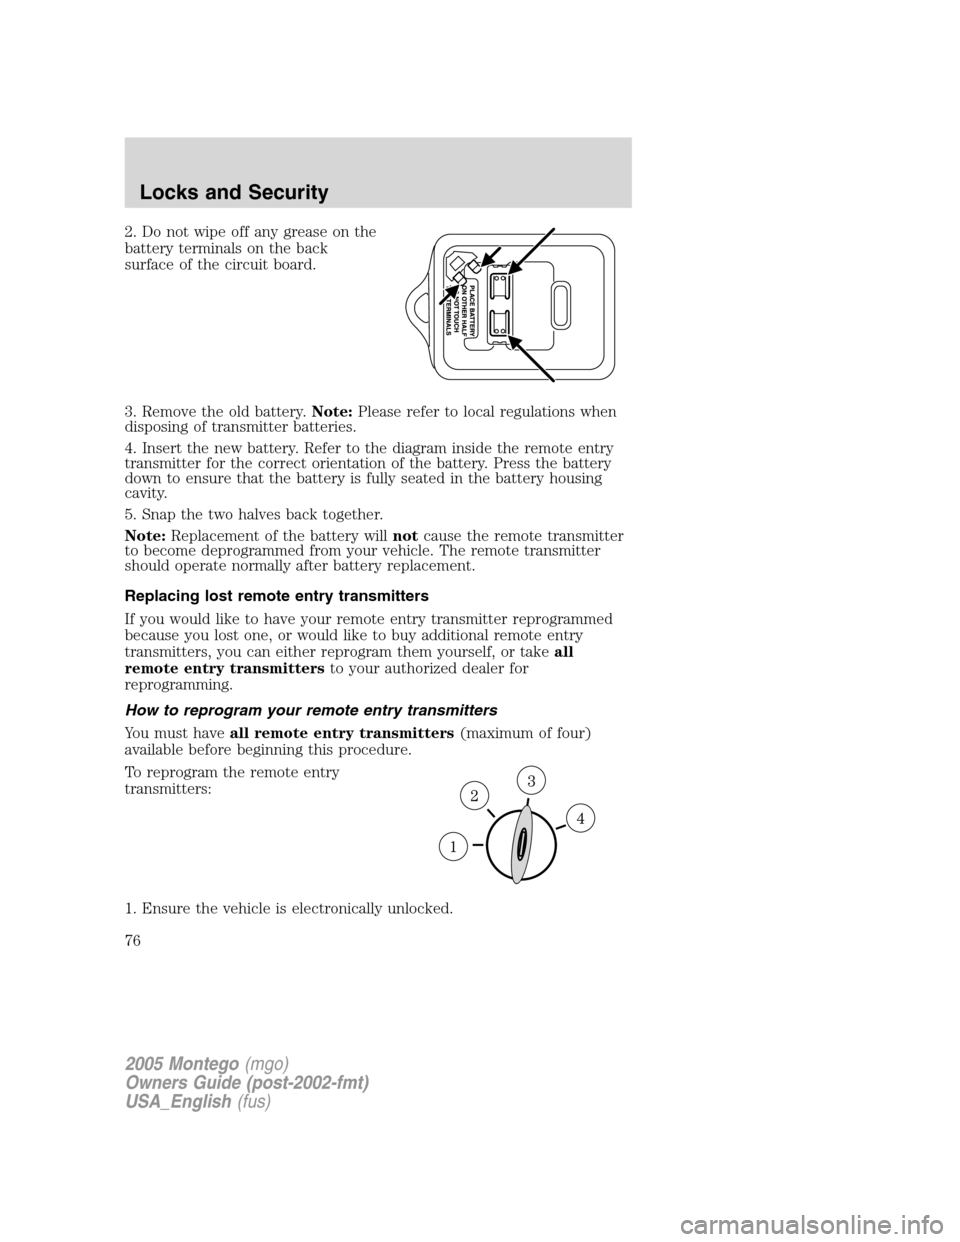 Mercury Montego 2005  s Manual PDF 2. Do not wipe off any grease on the
battery terminals on the back
surface of the circuit board.
3. Remove the old battery.Note:Please refer to local regulations when
disposing of transmitter batterie